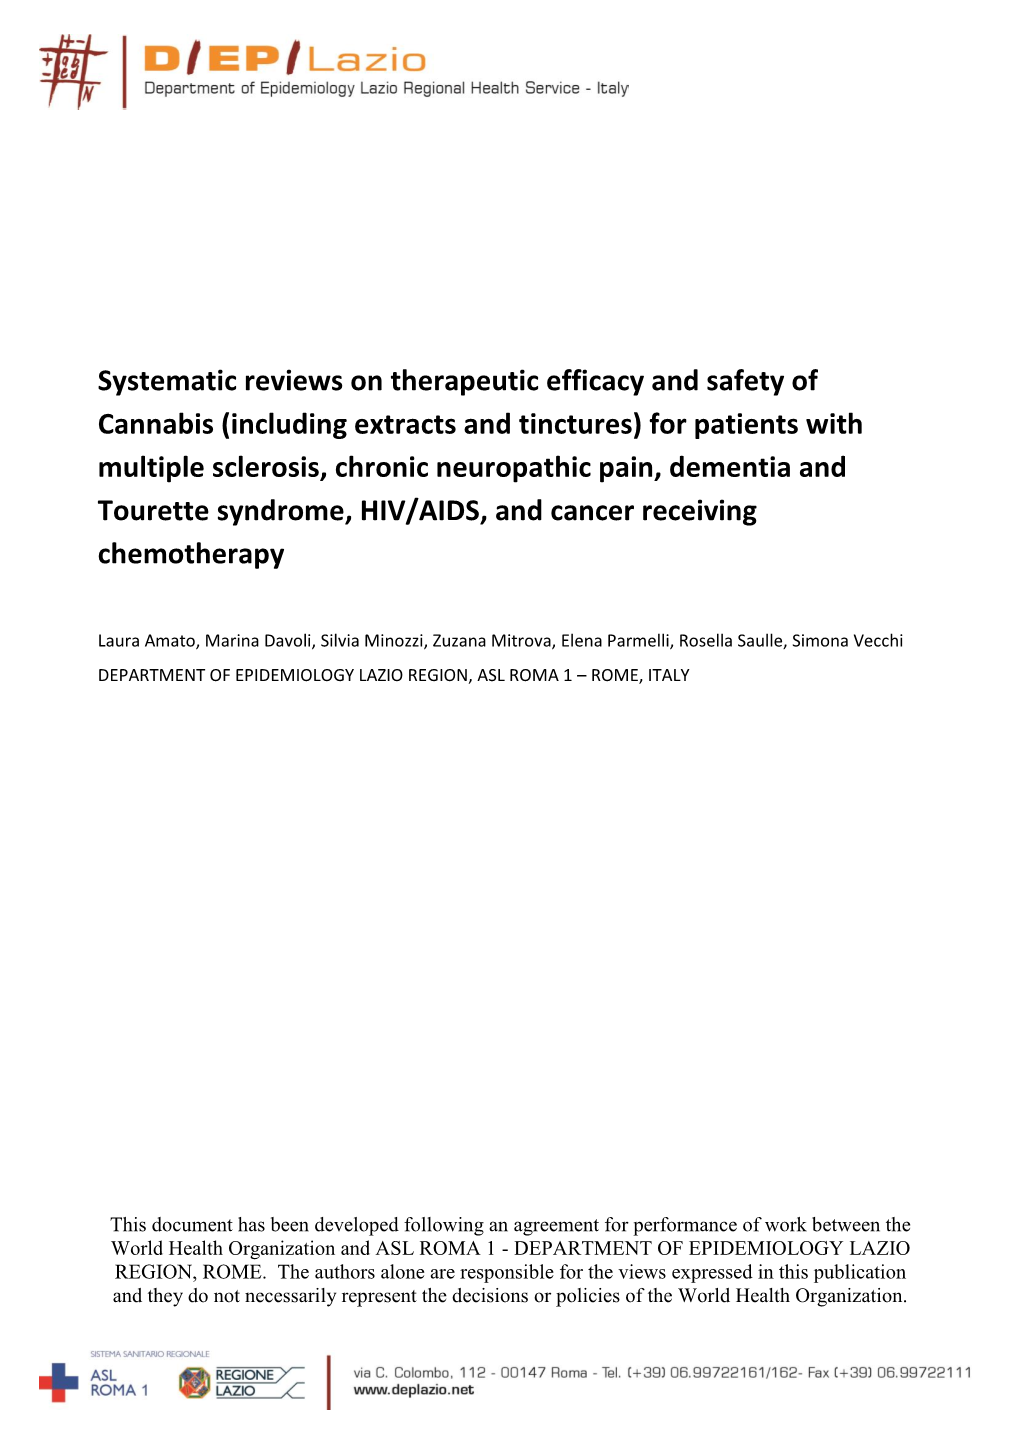 Systematic Reviews on Therapeutic Efficacy and Safety of Cannabis